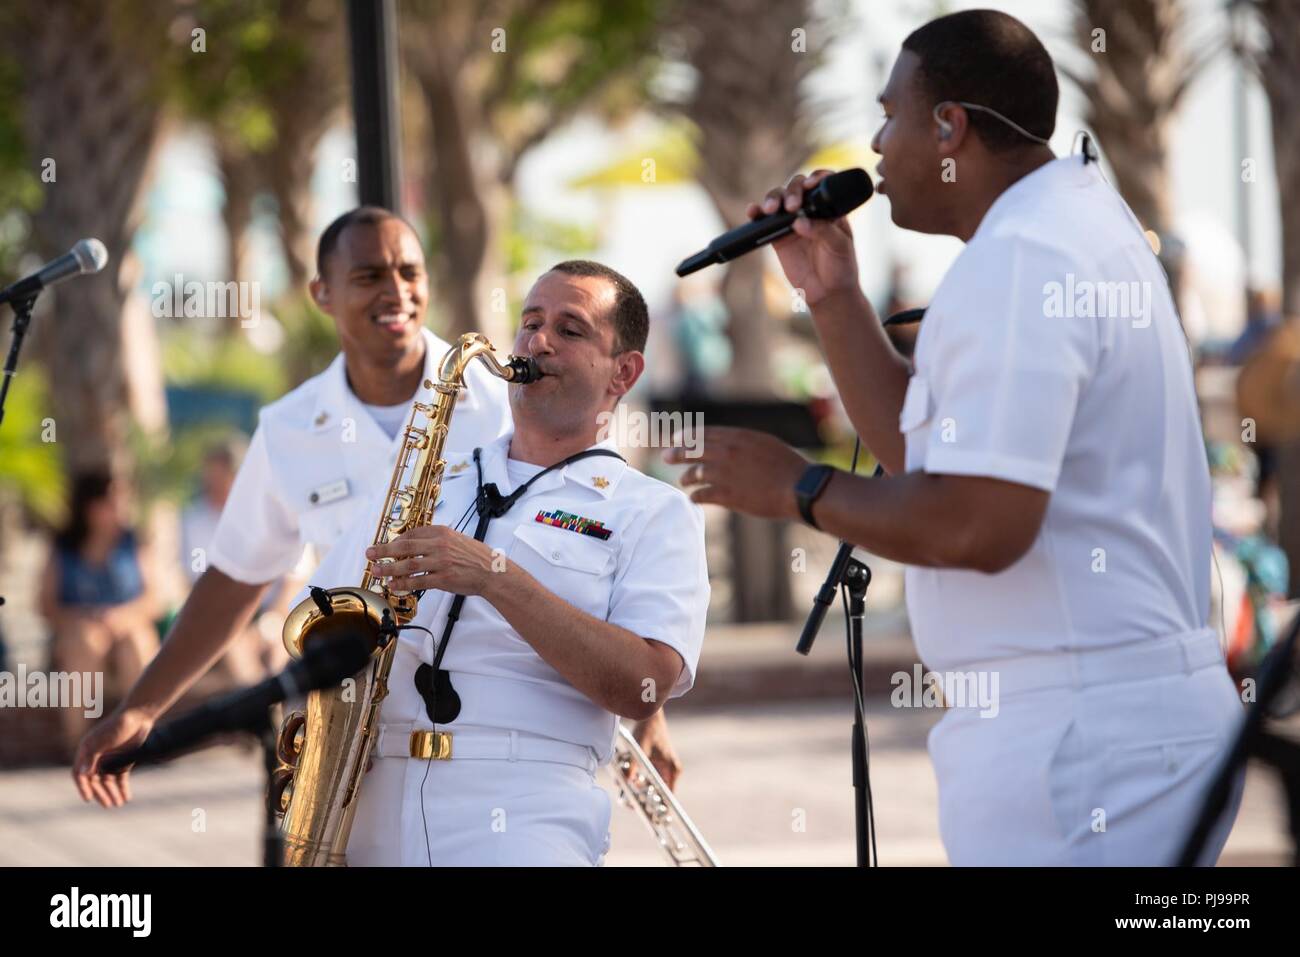 KEY WEST, Fla. (July 9, 2018) Musicians 1st Class David Smith, left, Manuel Pelayo de Gongora, center, and Cory Parker, right, perform with the U.S. Navy Band Cruisers popular music group during a concert at Mallory Square in Key West, Fla. The Navy Band performed in seven cities in Florida, connecting communities to the Navy and building awareness and support for the Navy. Stock Photo